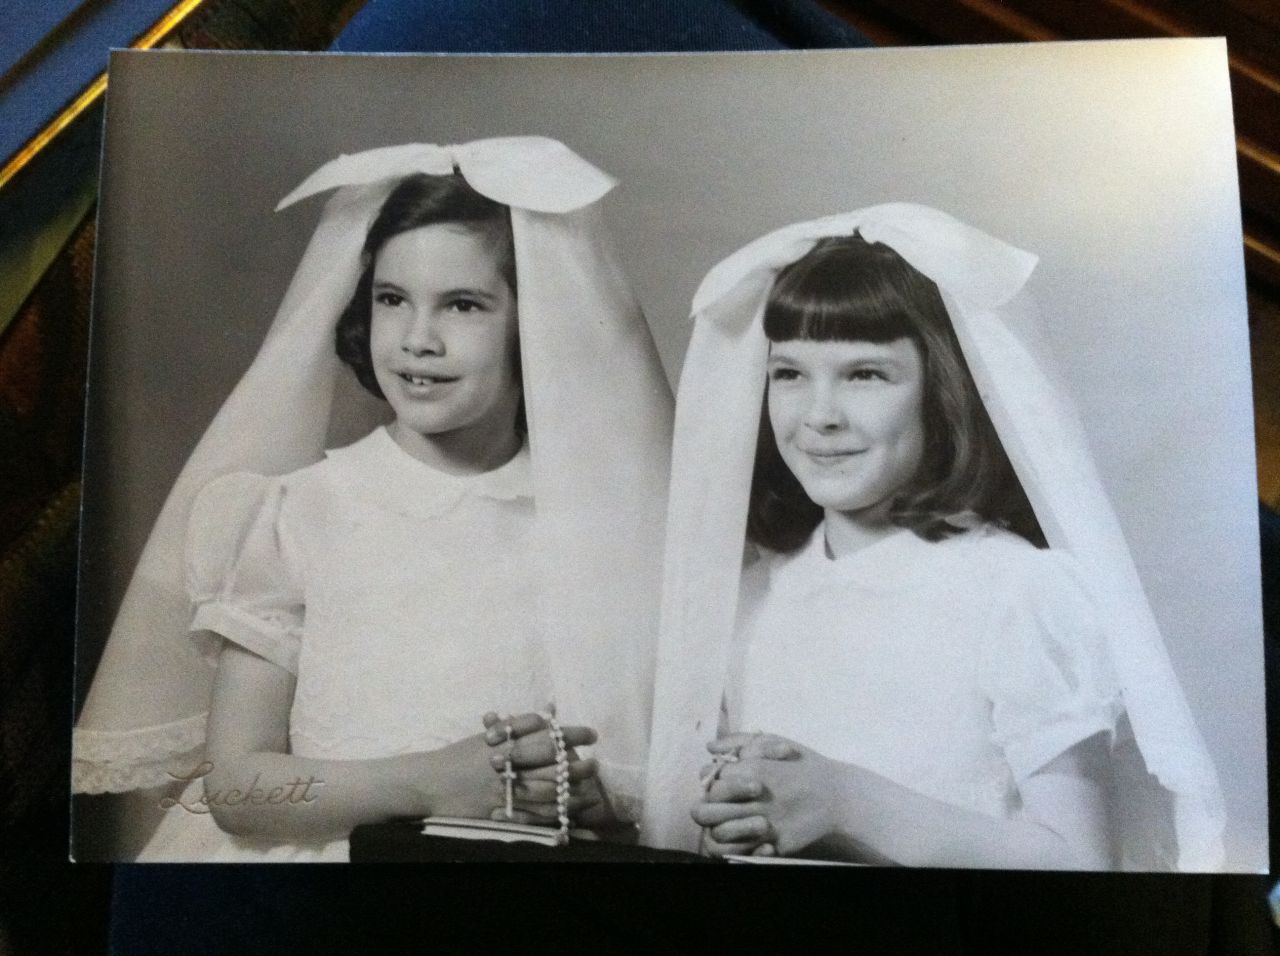 <a href="http://ireport.cnn.com/docs/DOC-947432">Natalie Montanaro</a>, right, and her sister took a photo before their first Holy Communion in 1967. She says many women in the 1960s copied Jackie Kennedy's look. "Really, my favorite look was the short, cropped jackets with A-line knee-length skirts and a pillbox hat with gloves for church," she says.